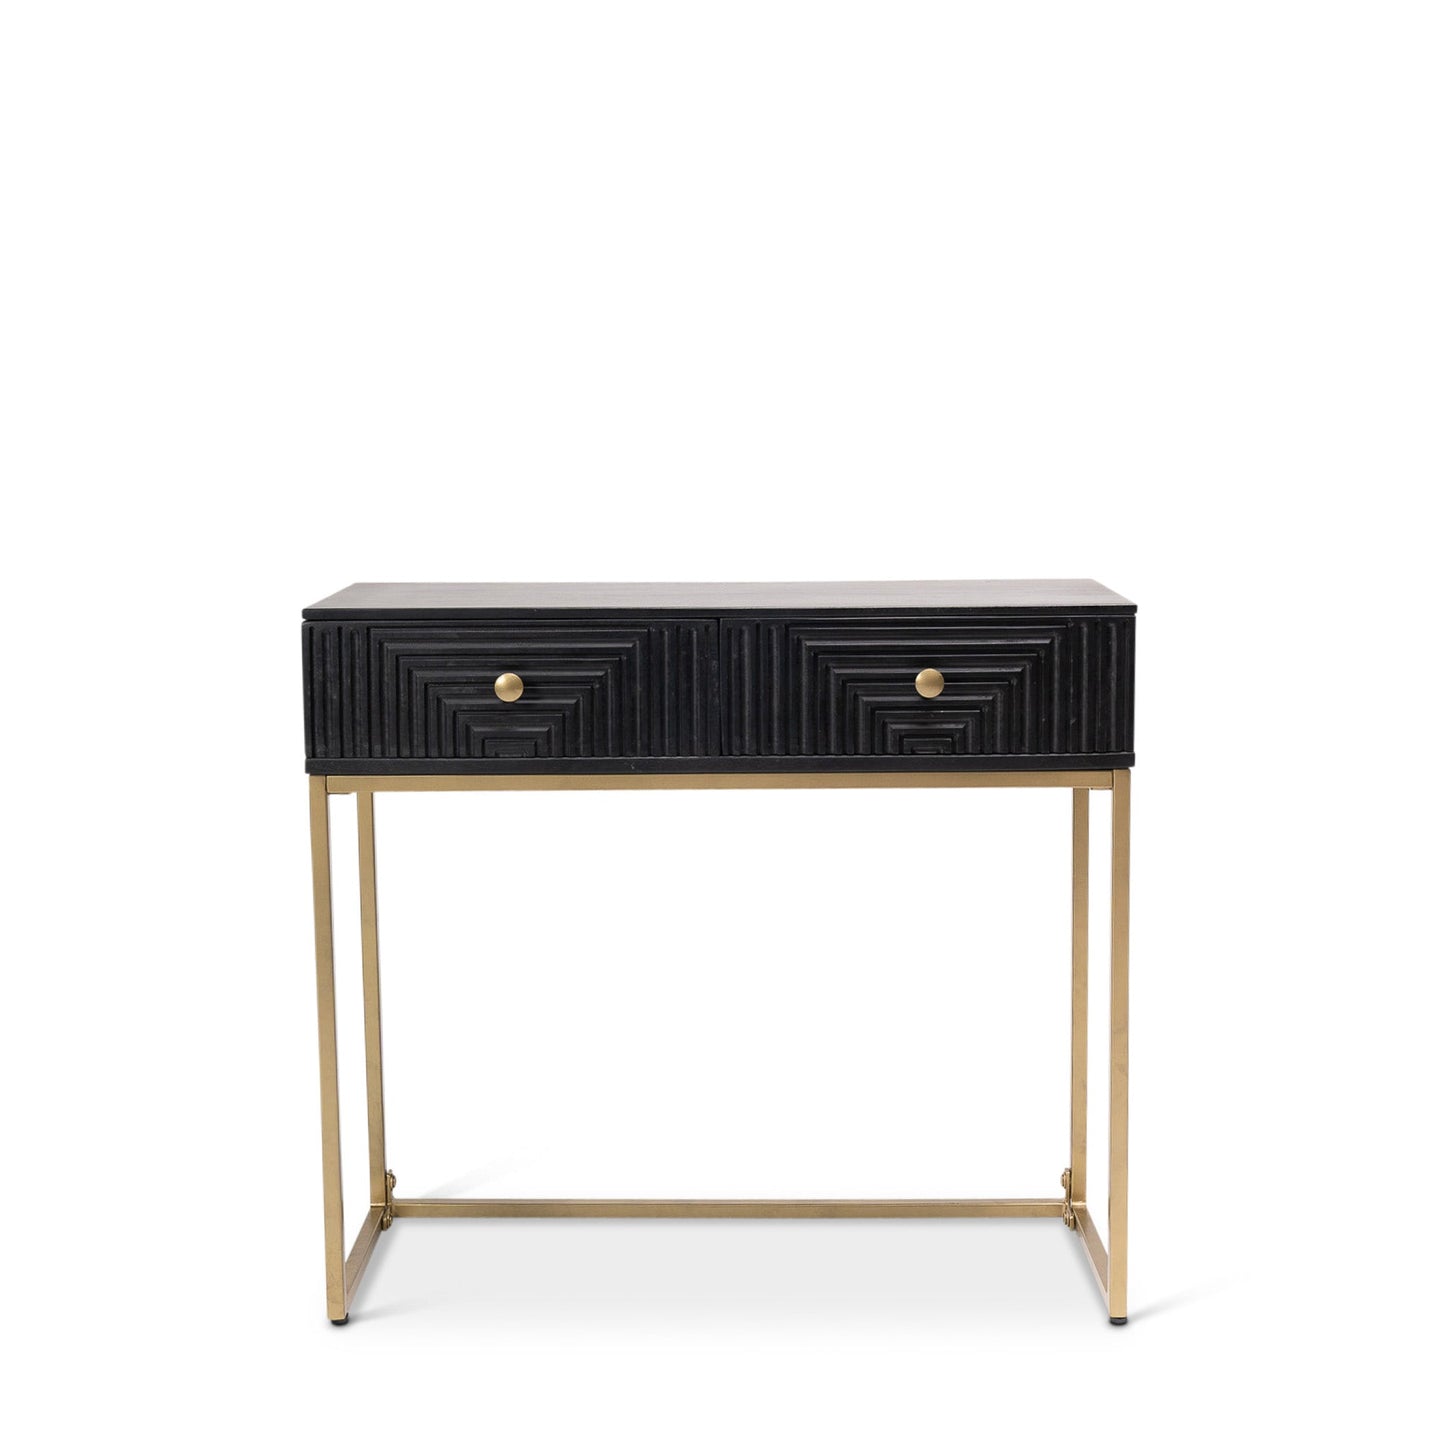 Rayna 2 Drawer Console Table - Jet Black